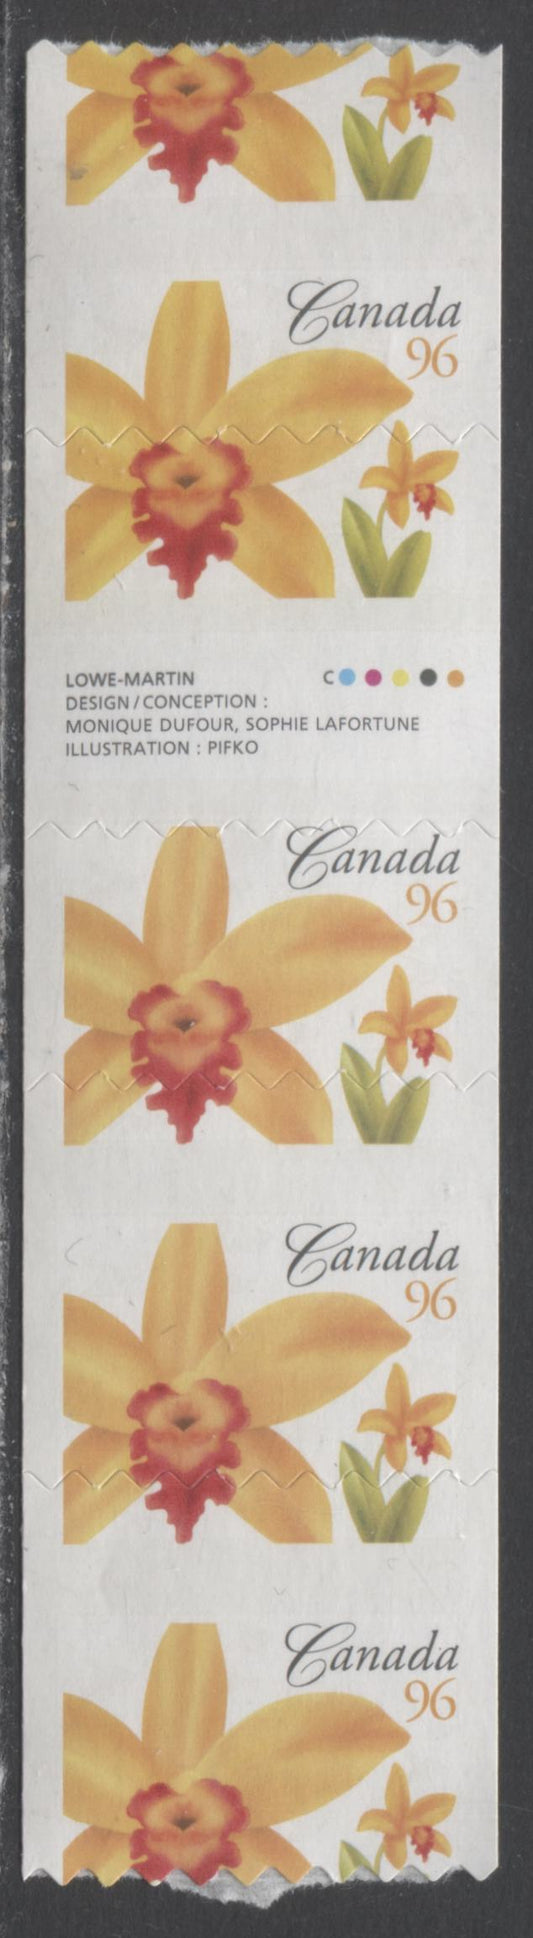 Lot 86 Canada #2245T1 96c Multicolored Fire Dancer', 2007 Flower Definitive Coils, A VFNH Gutter Strip Of 4 With Die Cutting Shifted Down 4.5mm, Resulting In All 4 Stamps Having G4dH Tagging Errors